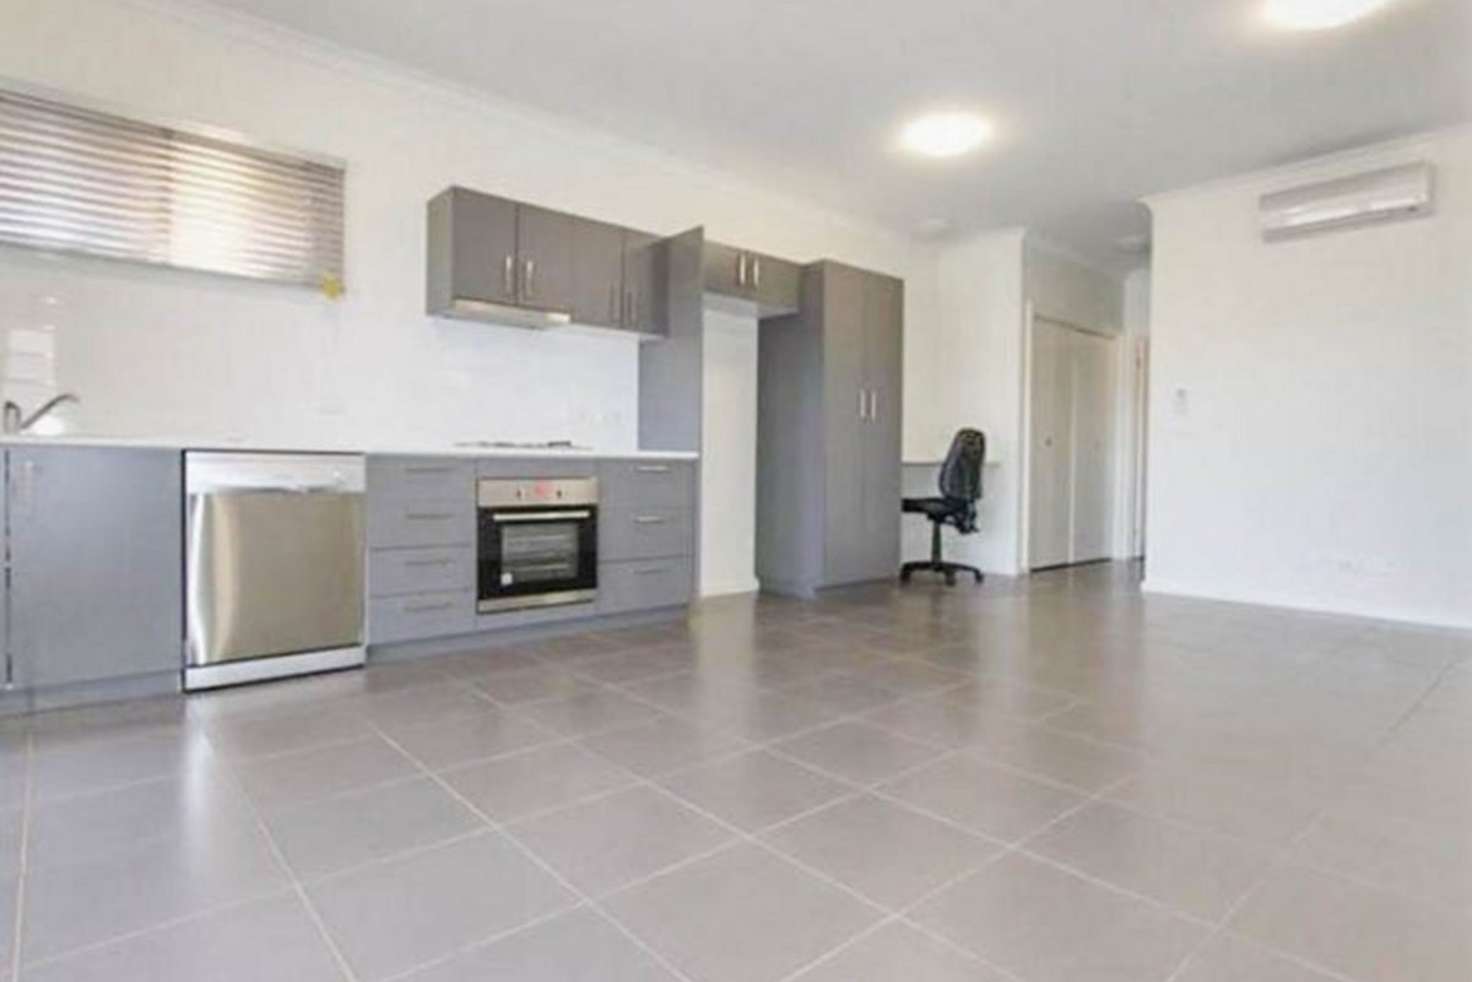 Main view of Homely apartment listing, 4/60 Morgans Street, Port Hedland WA 6721